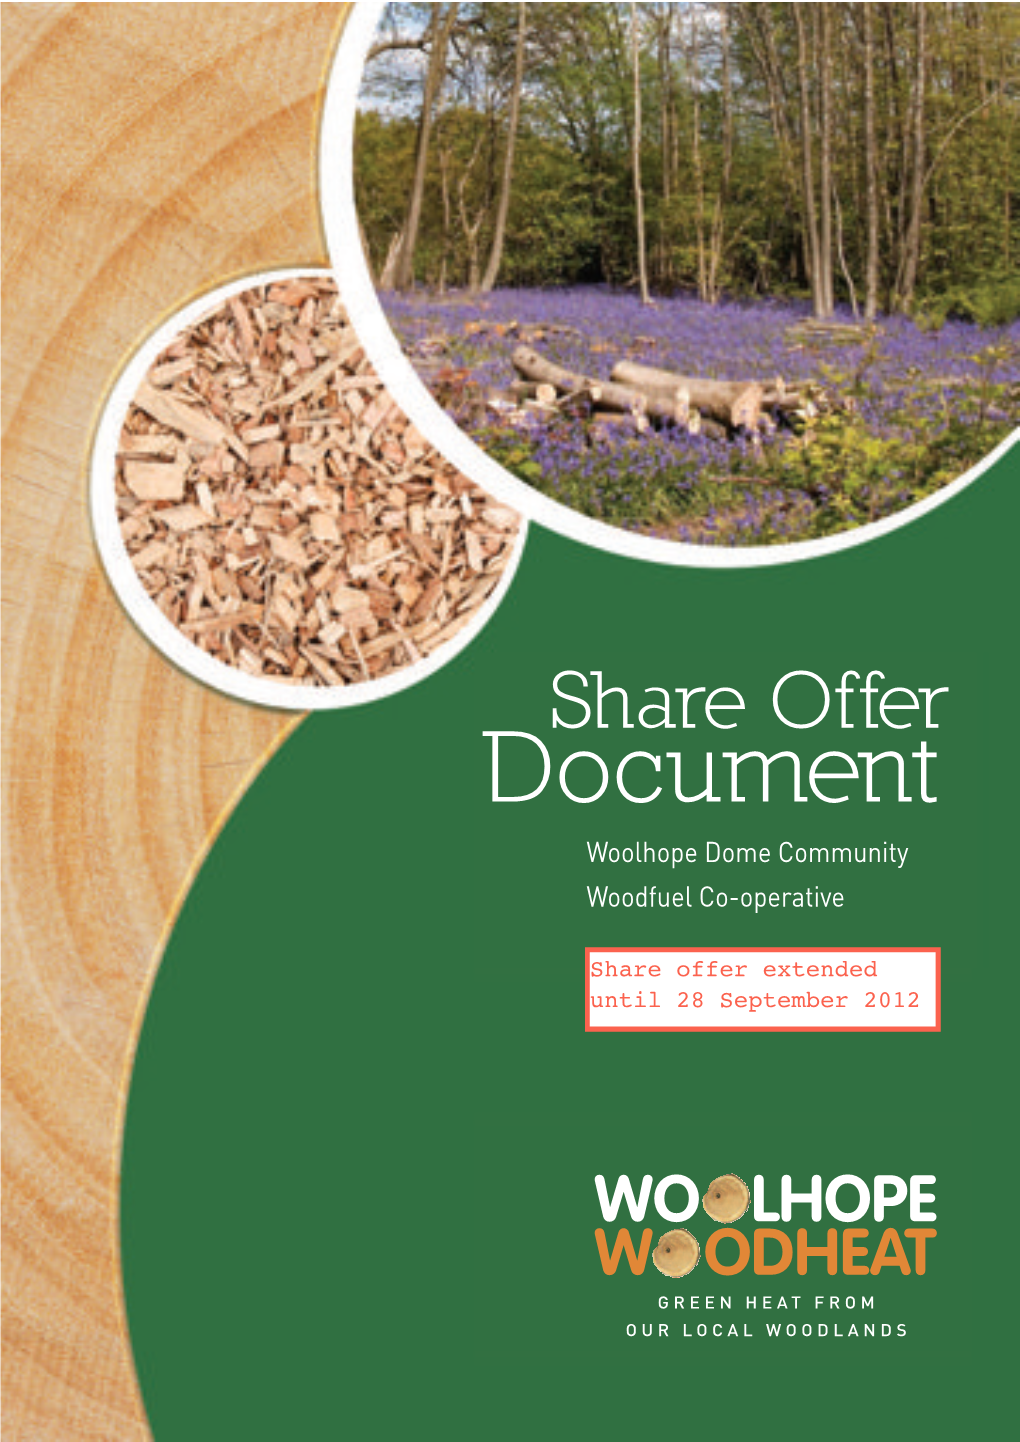 Share Offer Document Woolhope Dome Community Woodfuel Co-Operative